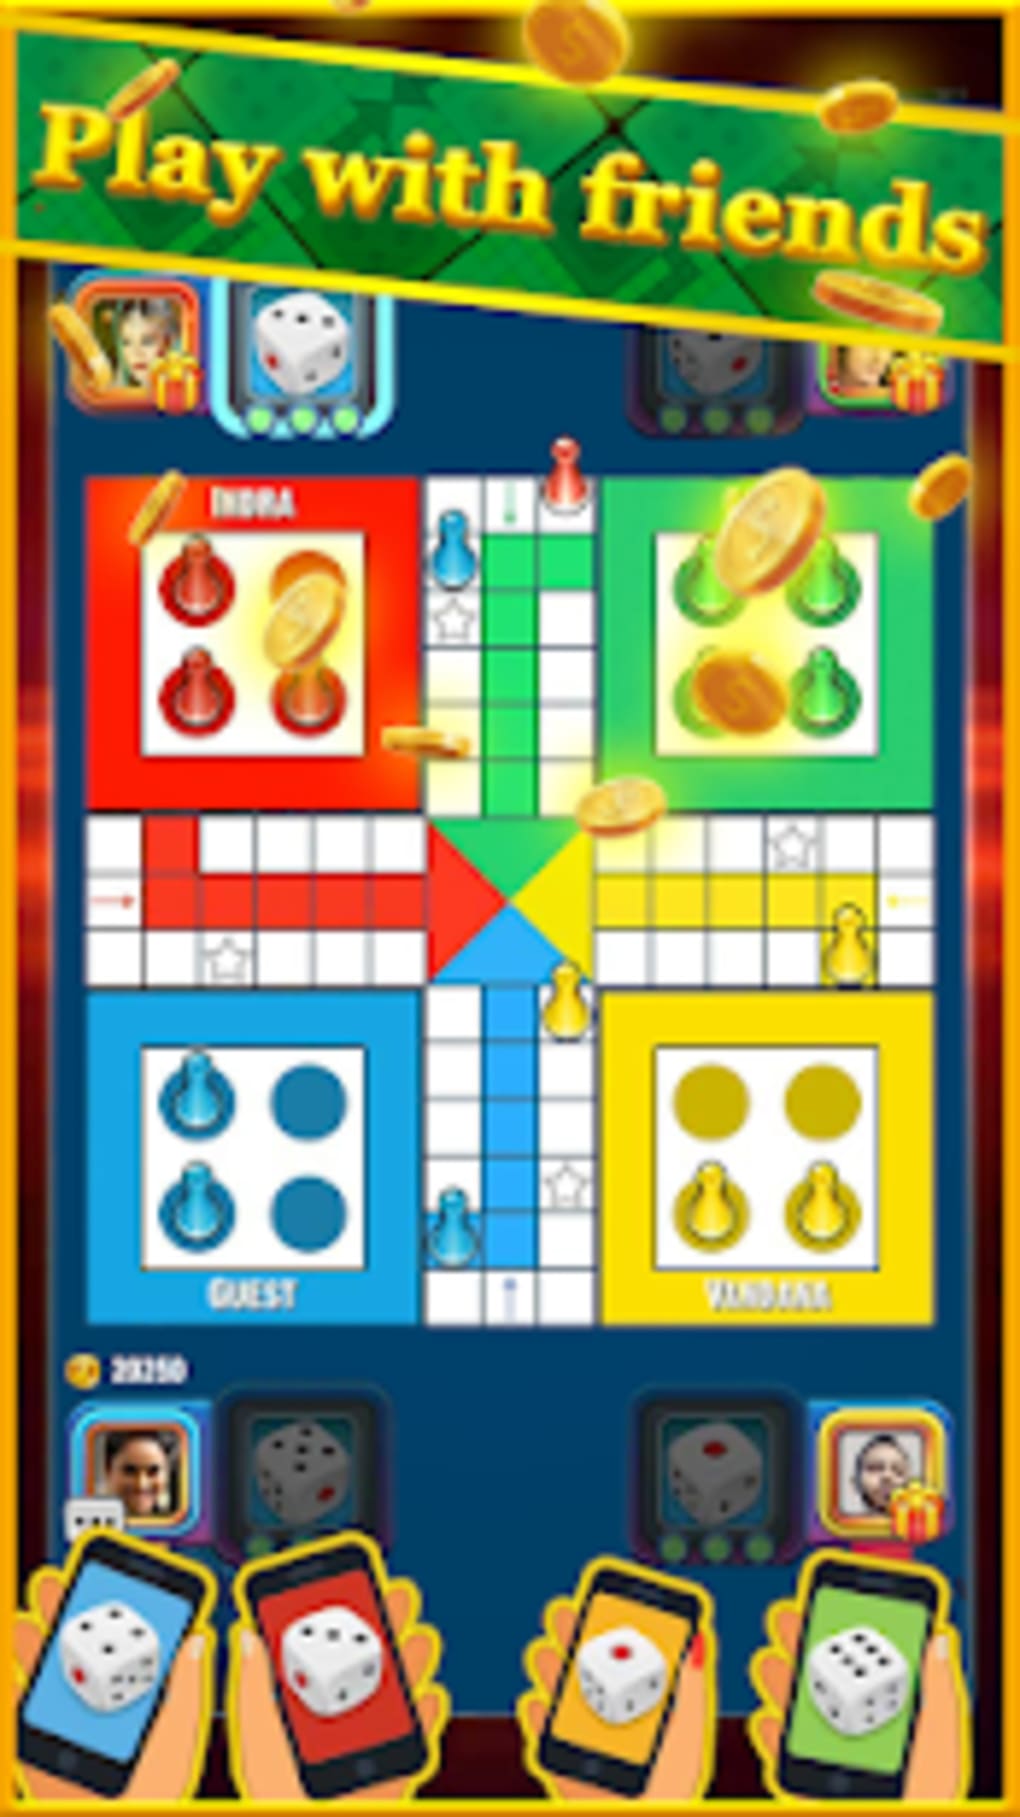 About: Ludo Master - New Ludo Game 2019 (Google Play version)